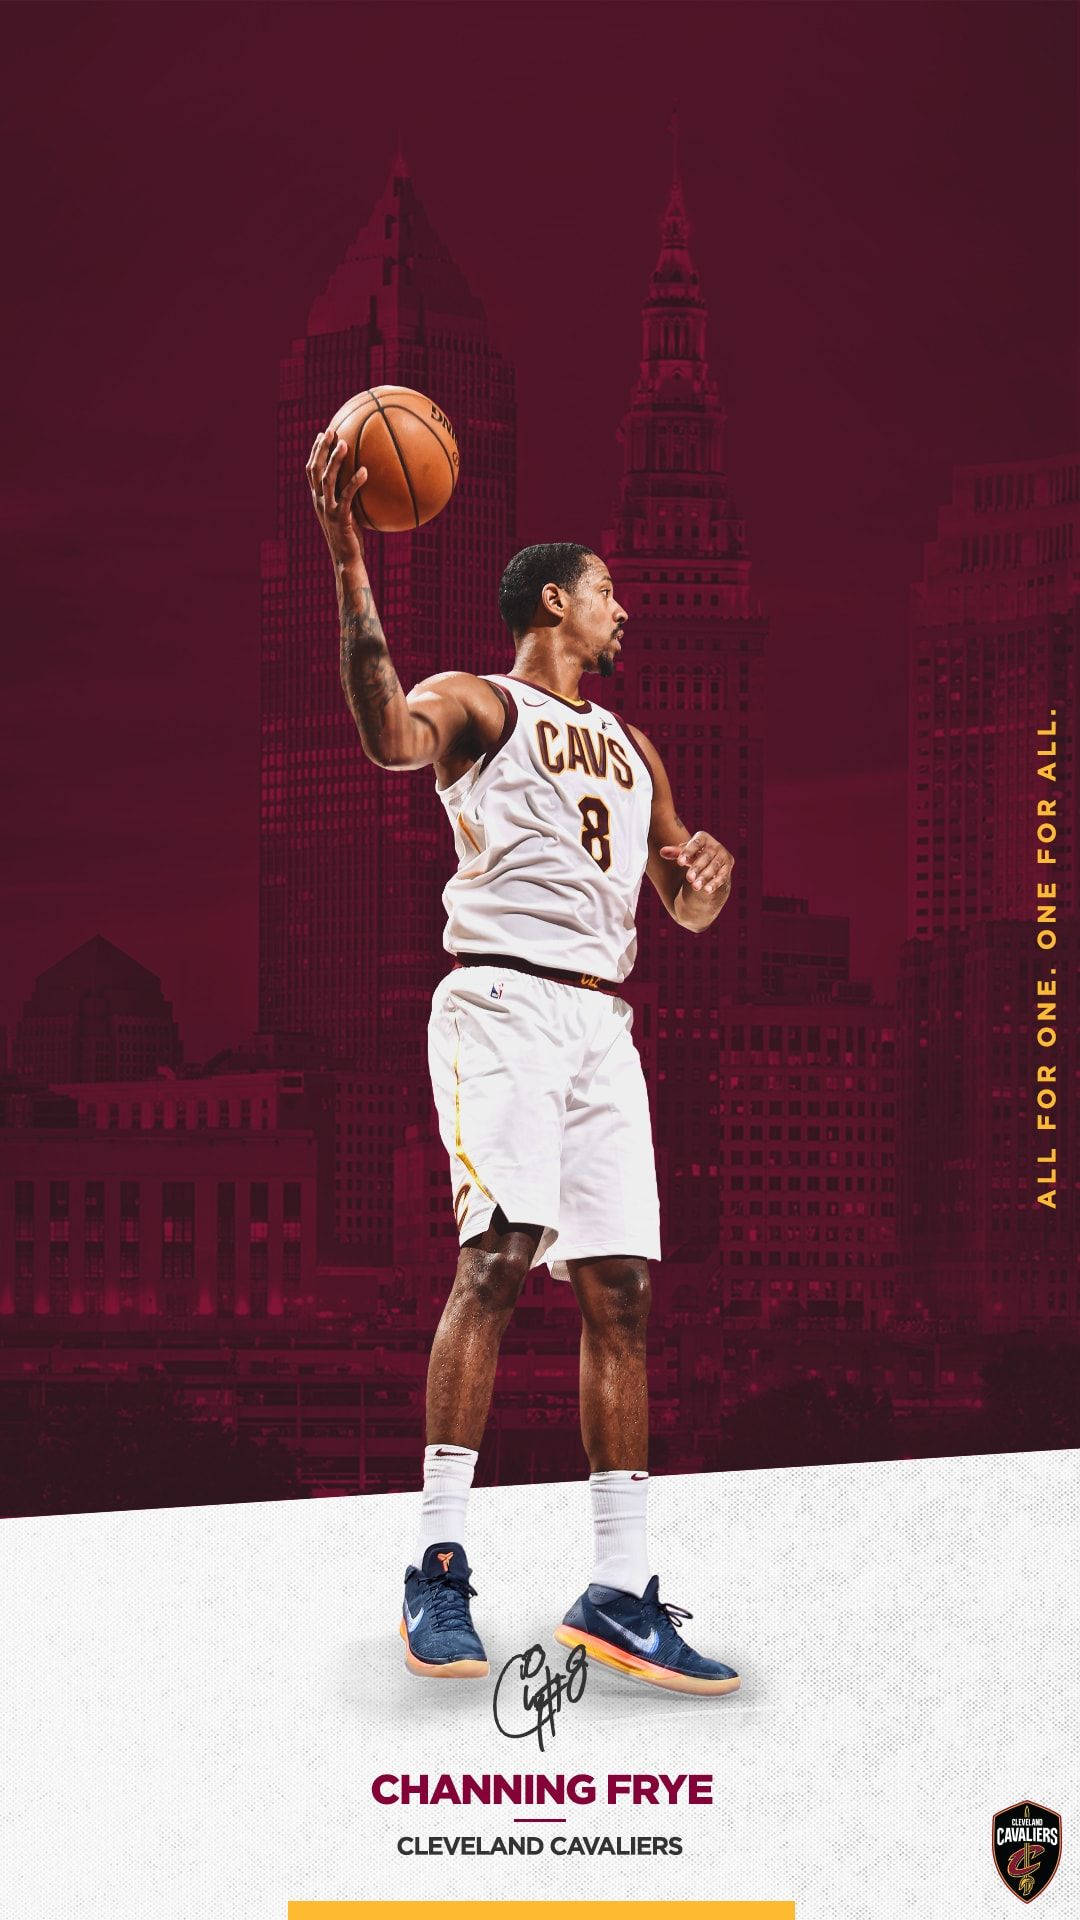 Cleveland Cavaliers Channing Frye Background